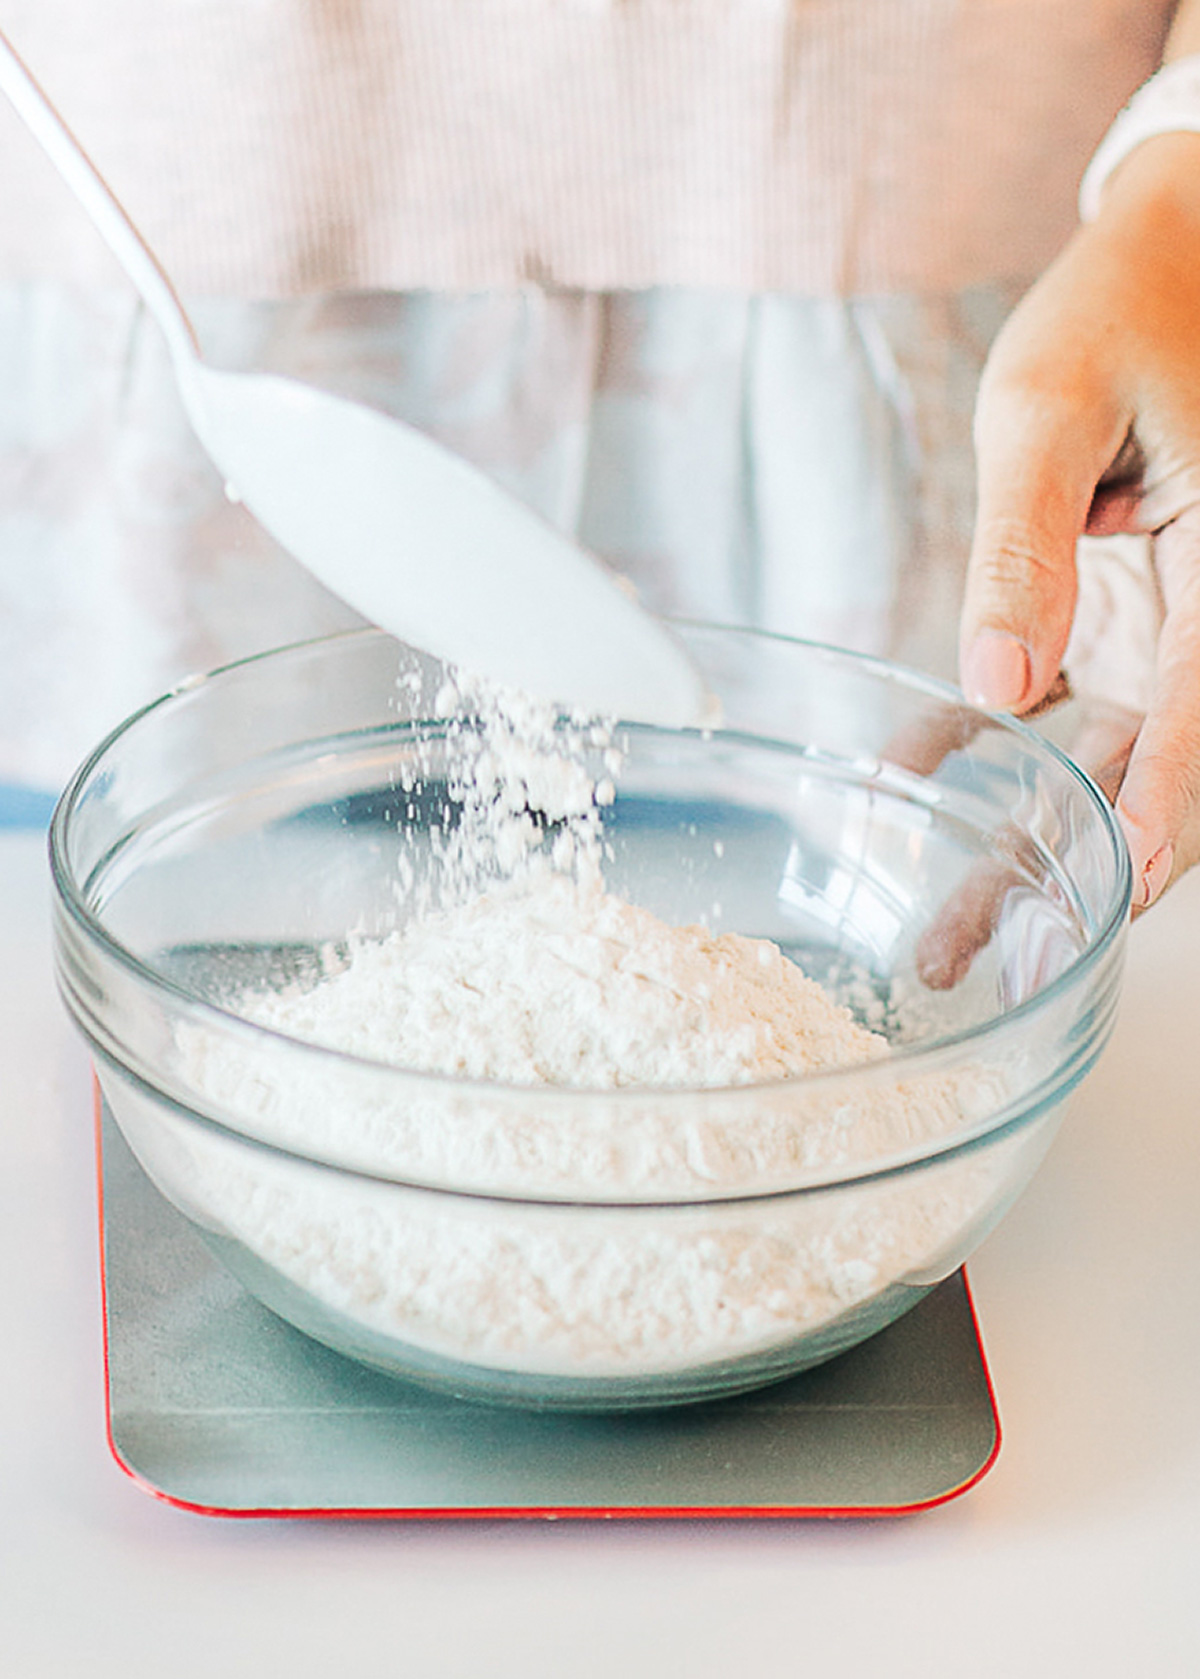 a woman measuring flour with a kitchen scale.